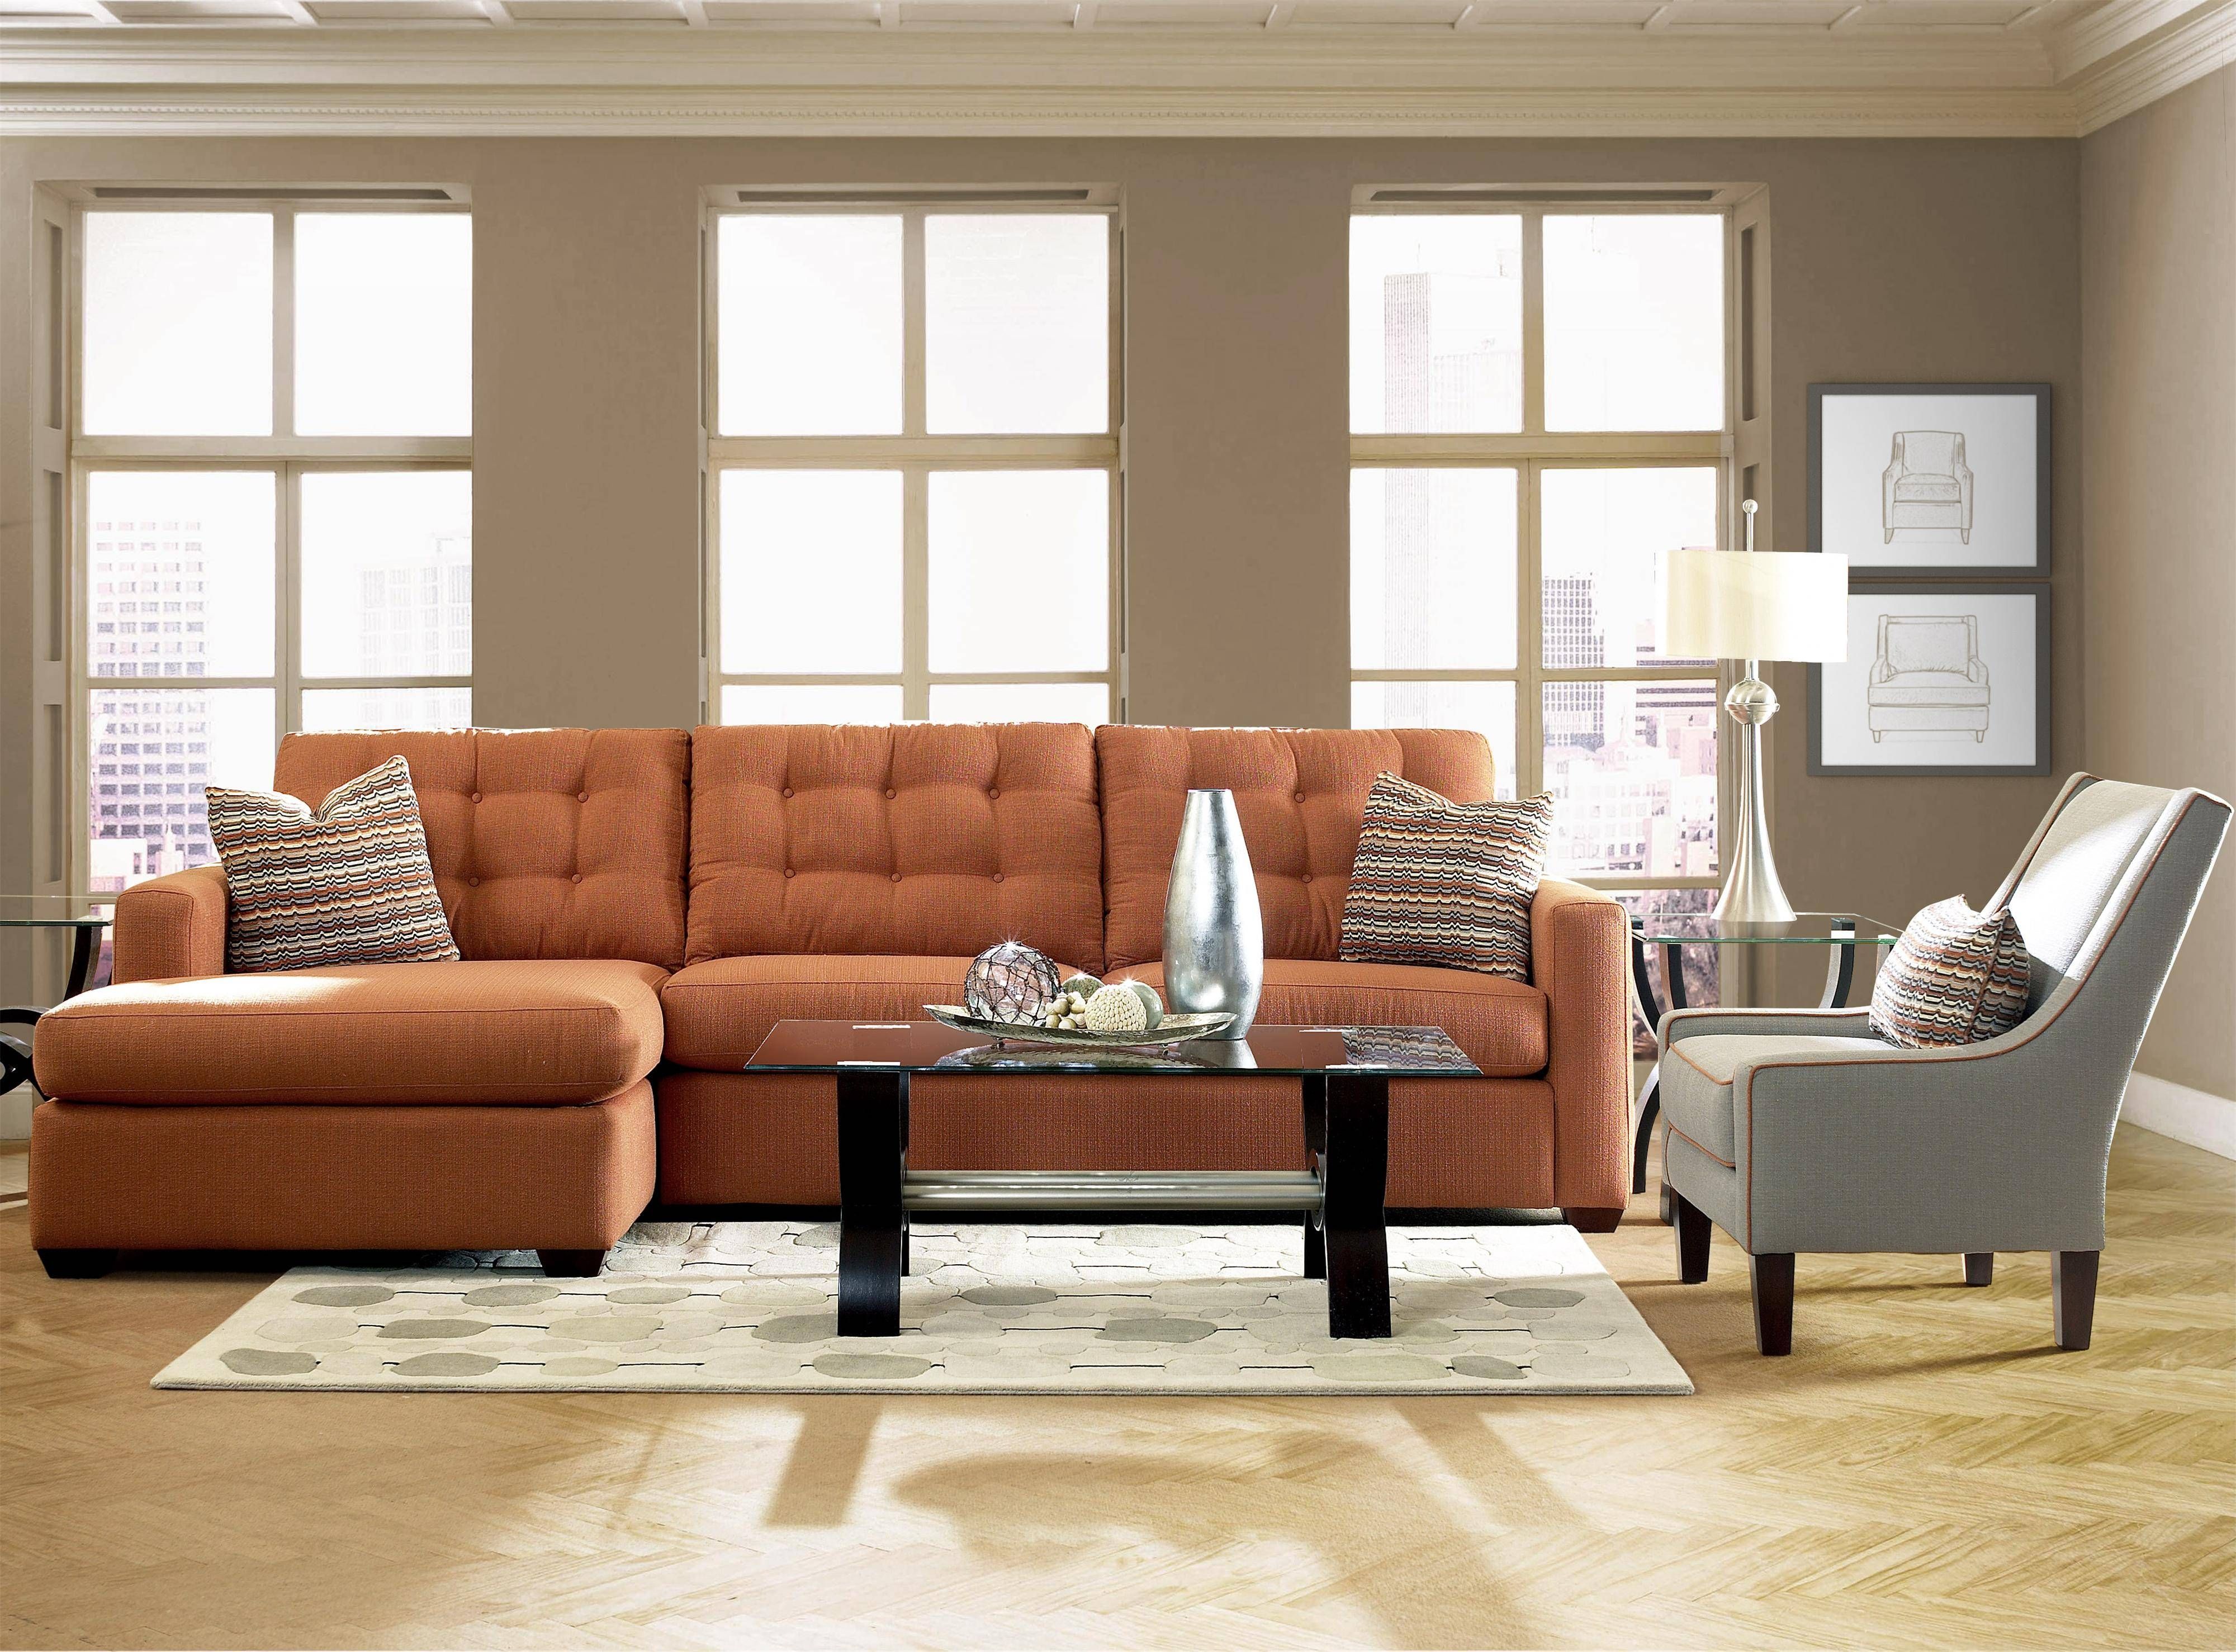 Contemporary Sectional Sofa With Left Facing Chaise Lounge For Sofas And Chaises Lounge Sets (View 5 of 15)